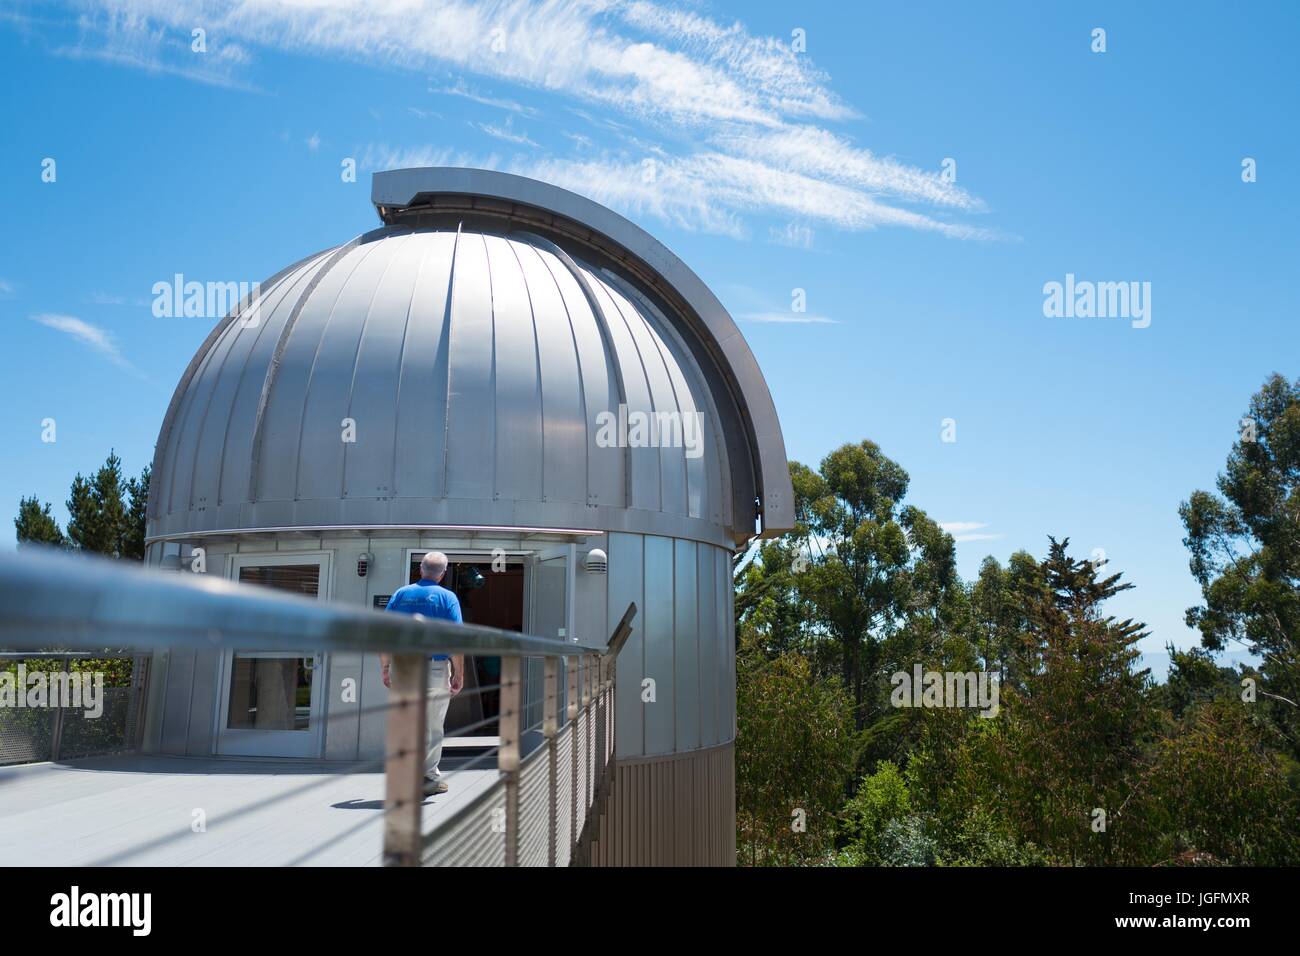 A man approaches an observatory dome on a bright sunny day at the Chabot Space and Science Center, a science museum and observatory in Oakland, California, June 15, 2017. Stock Photo